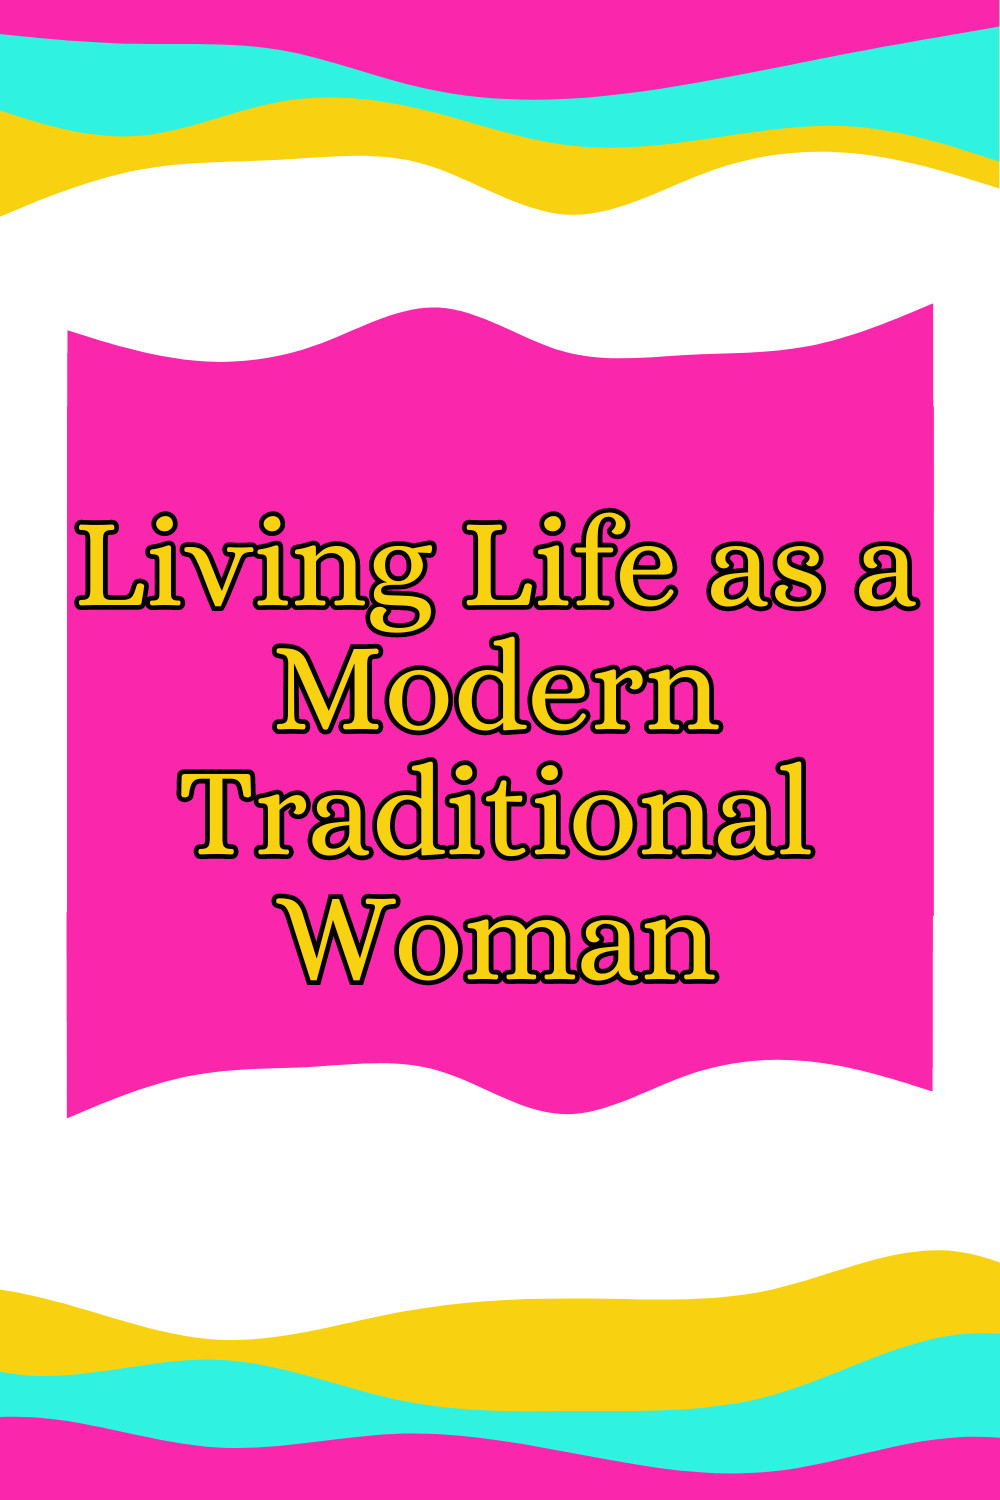 Living life as a modern traditional woman